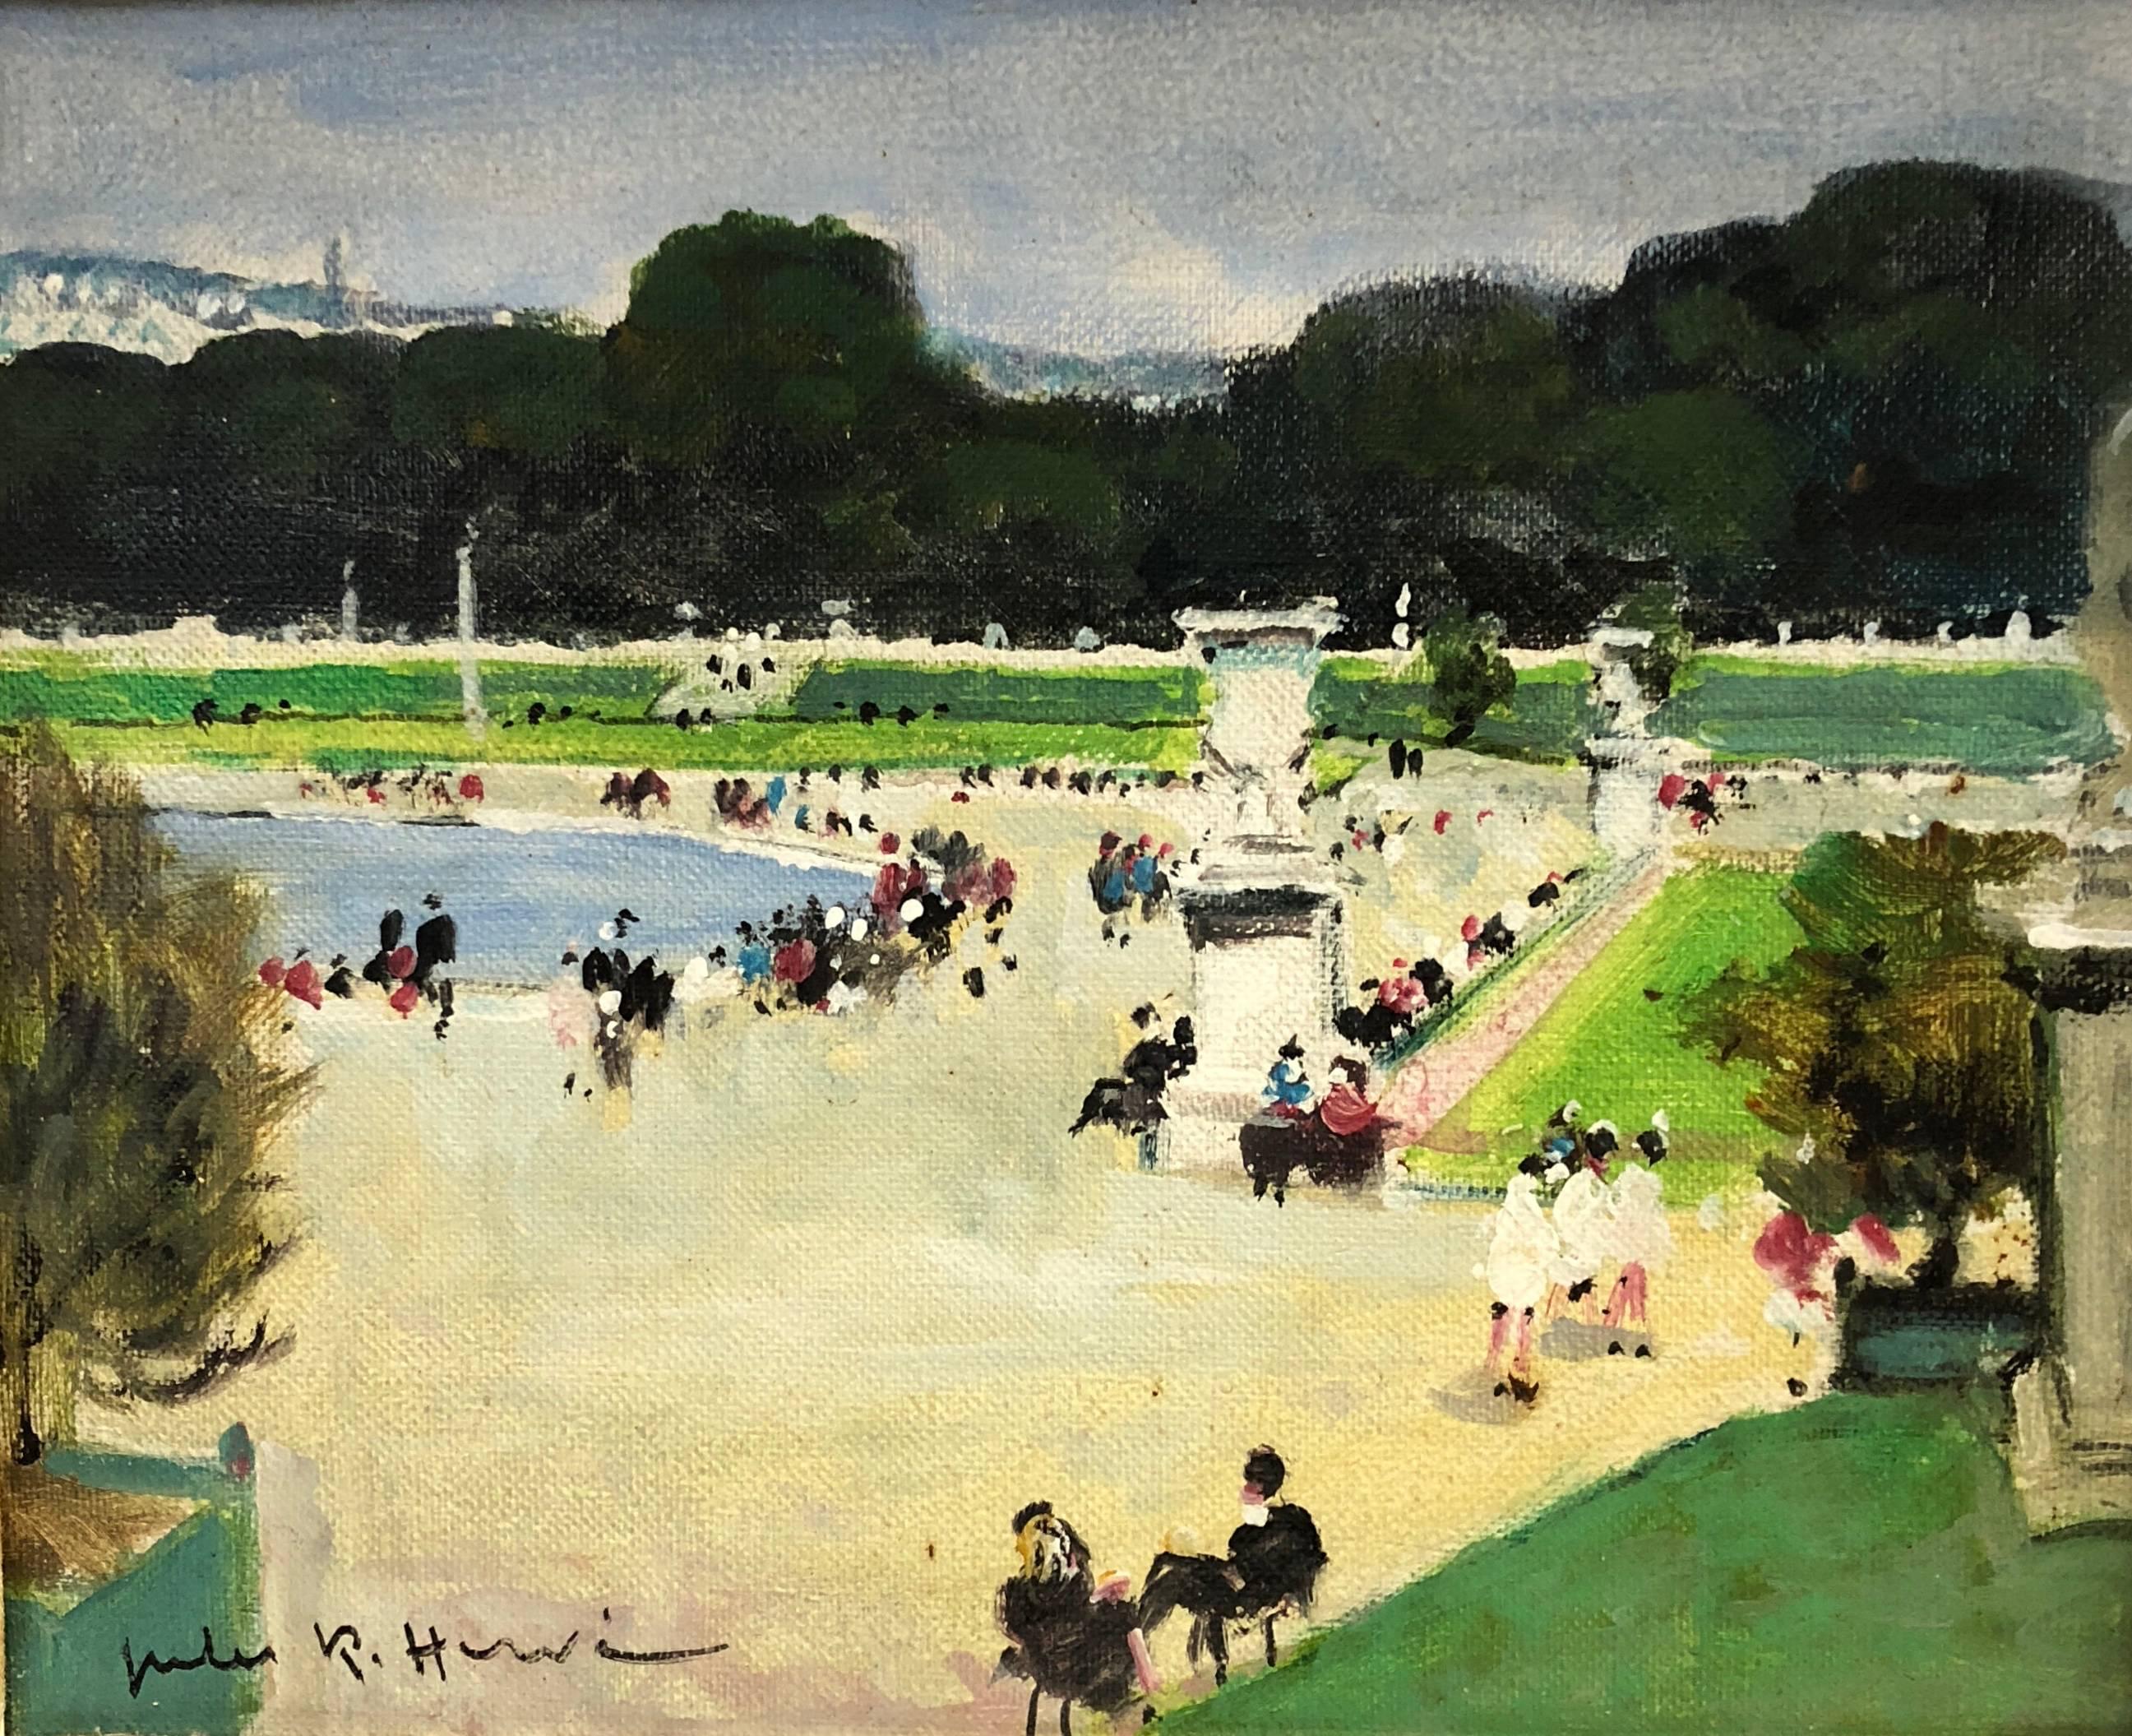 Jardin du Luxembourg pond scene by Jules René Hervé (French 1887-1981) signed lower left corner oil painting on board. 

About the Artist:

Jules René Hervé (1887–1981) was an French Academic painter, born in Langres, in Eastern France. Known